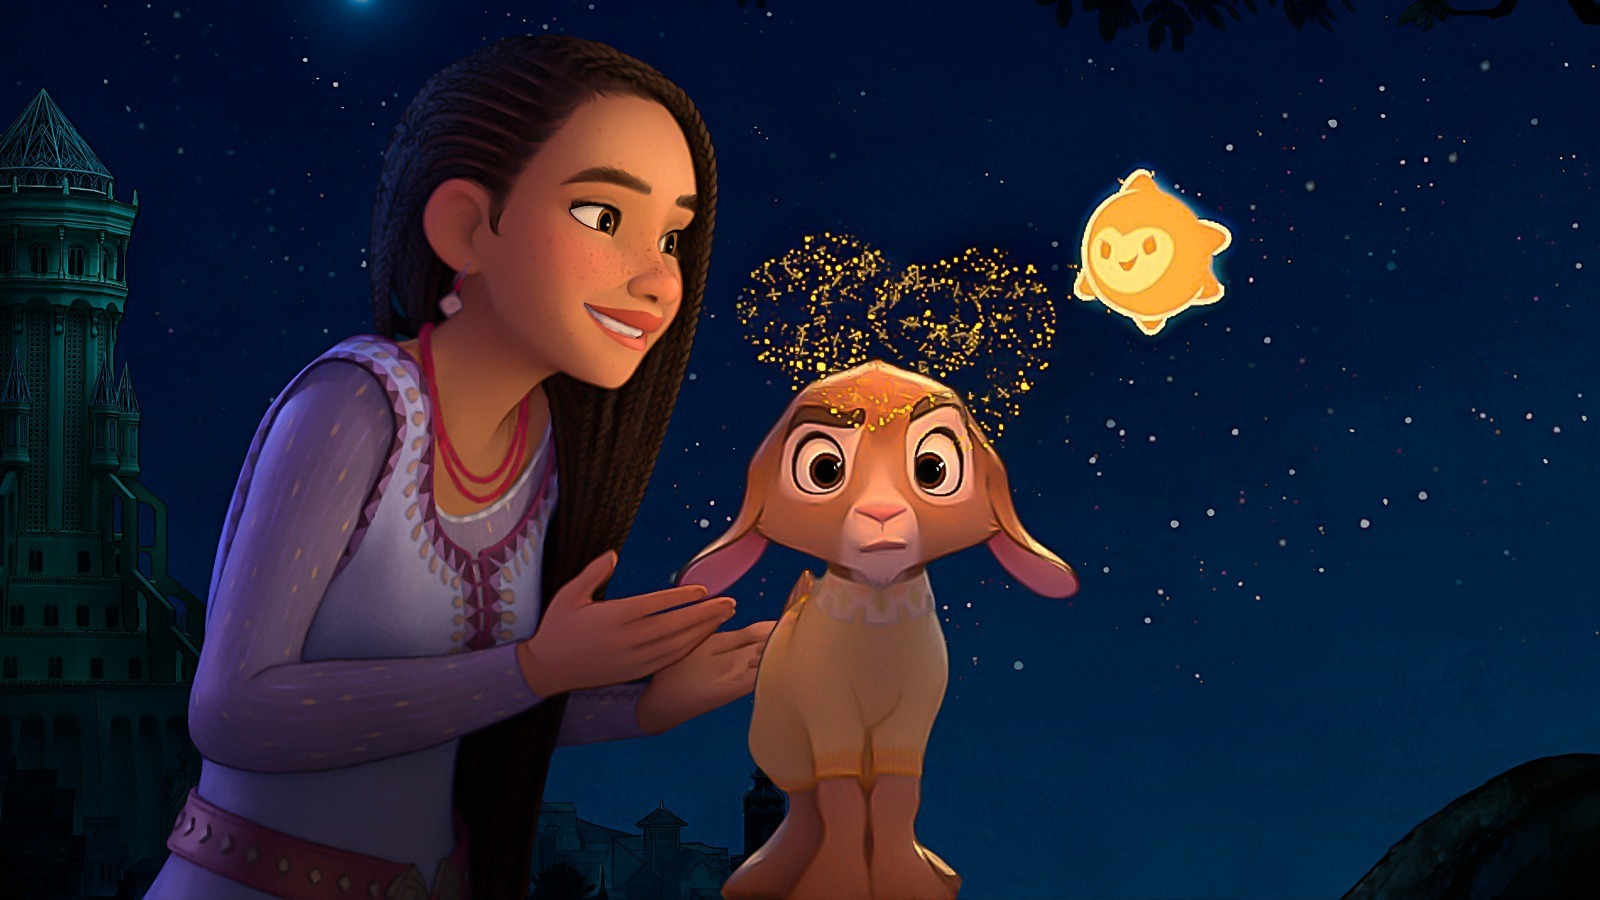 Review: 'Wish' is a so-so attempt at celebrating Disney's centennial